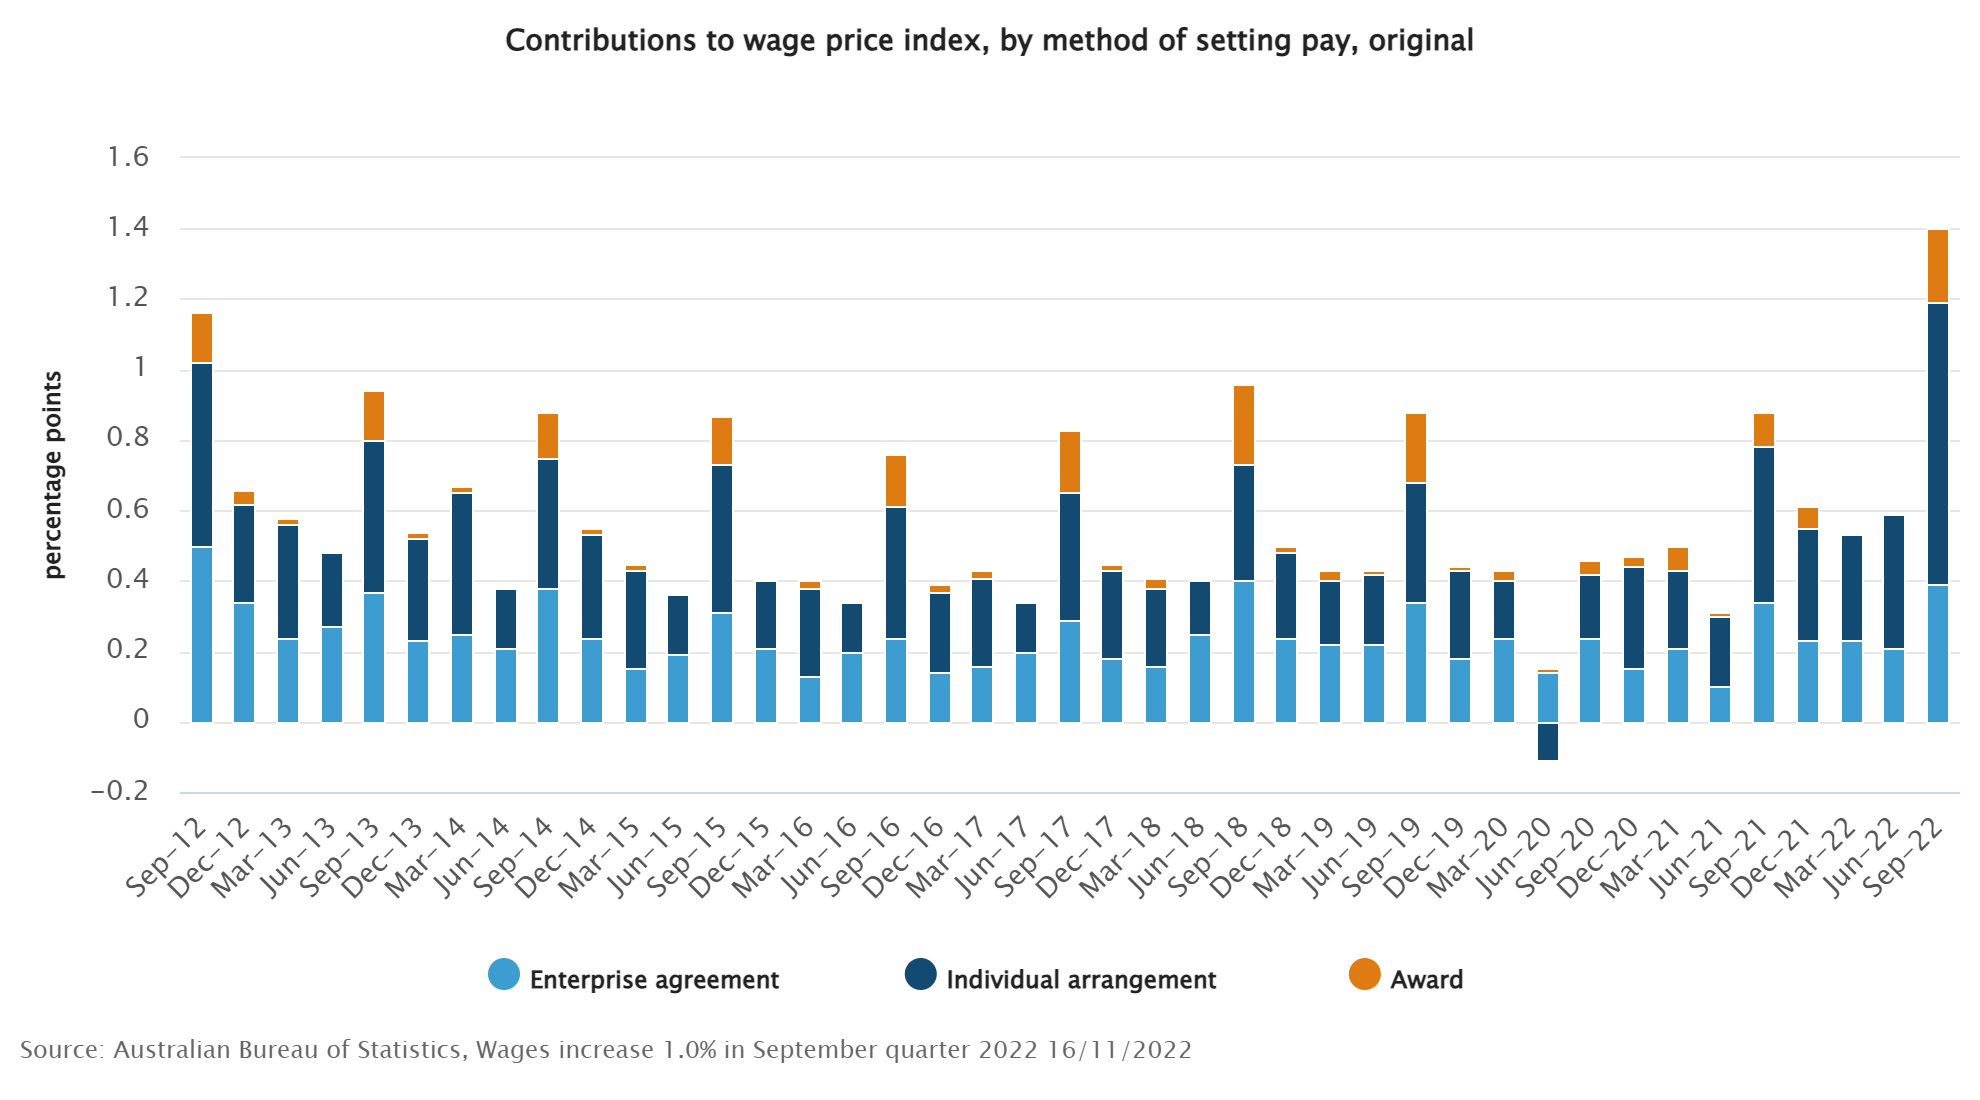 Contributions to wage price index, by method of setting pay, original.